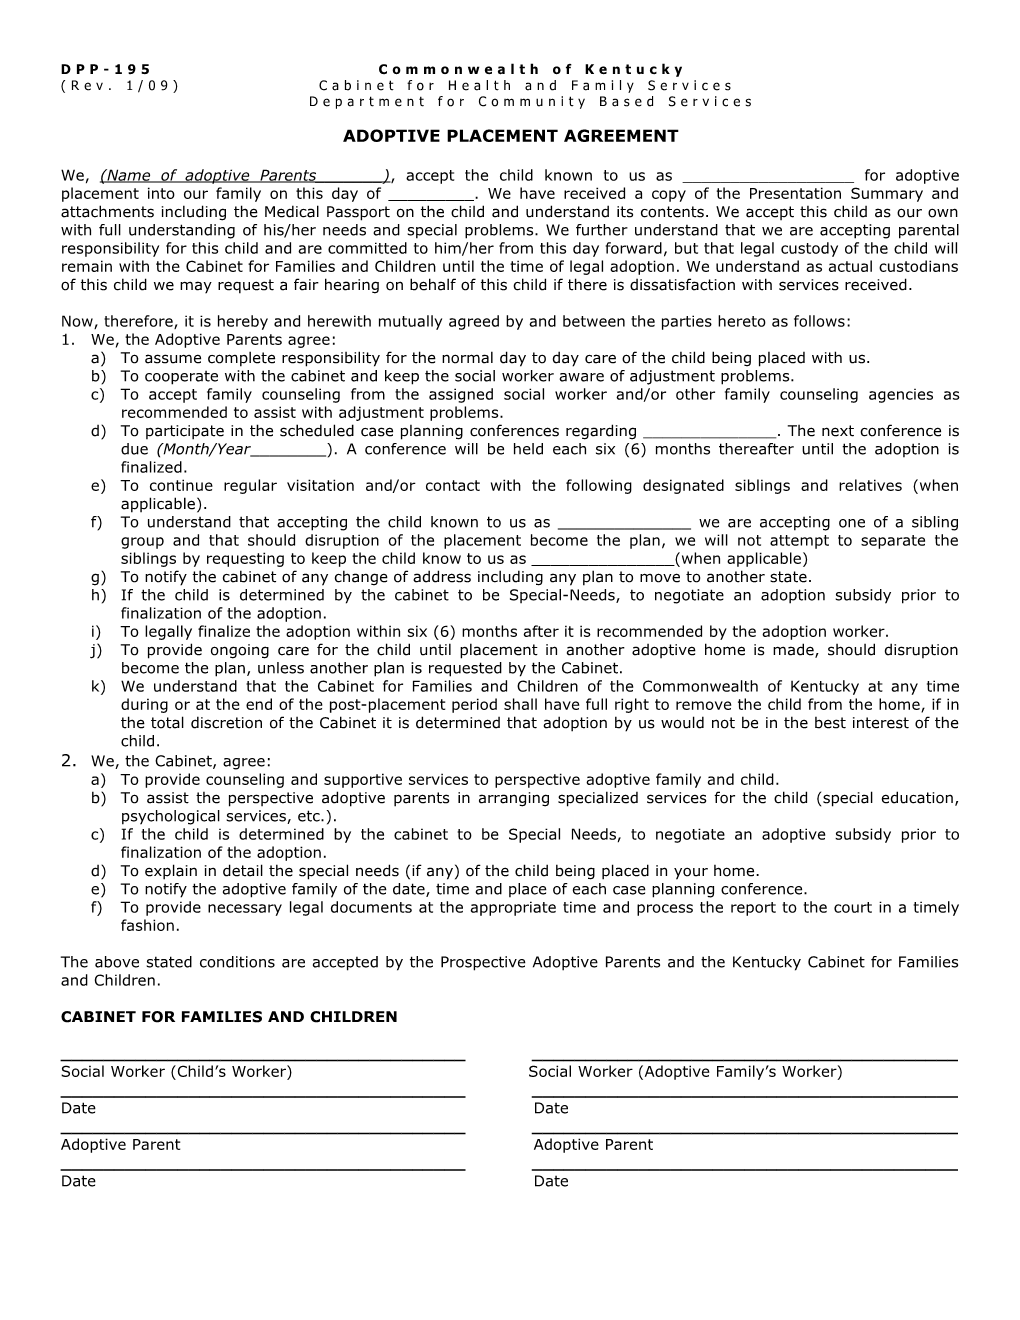 Adoptive Placement Agreement